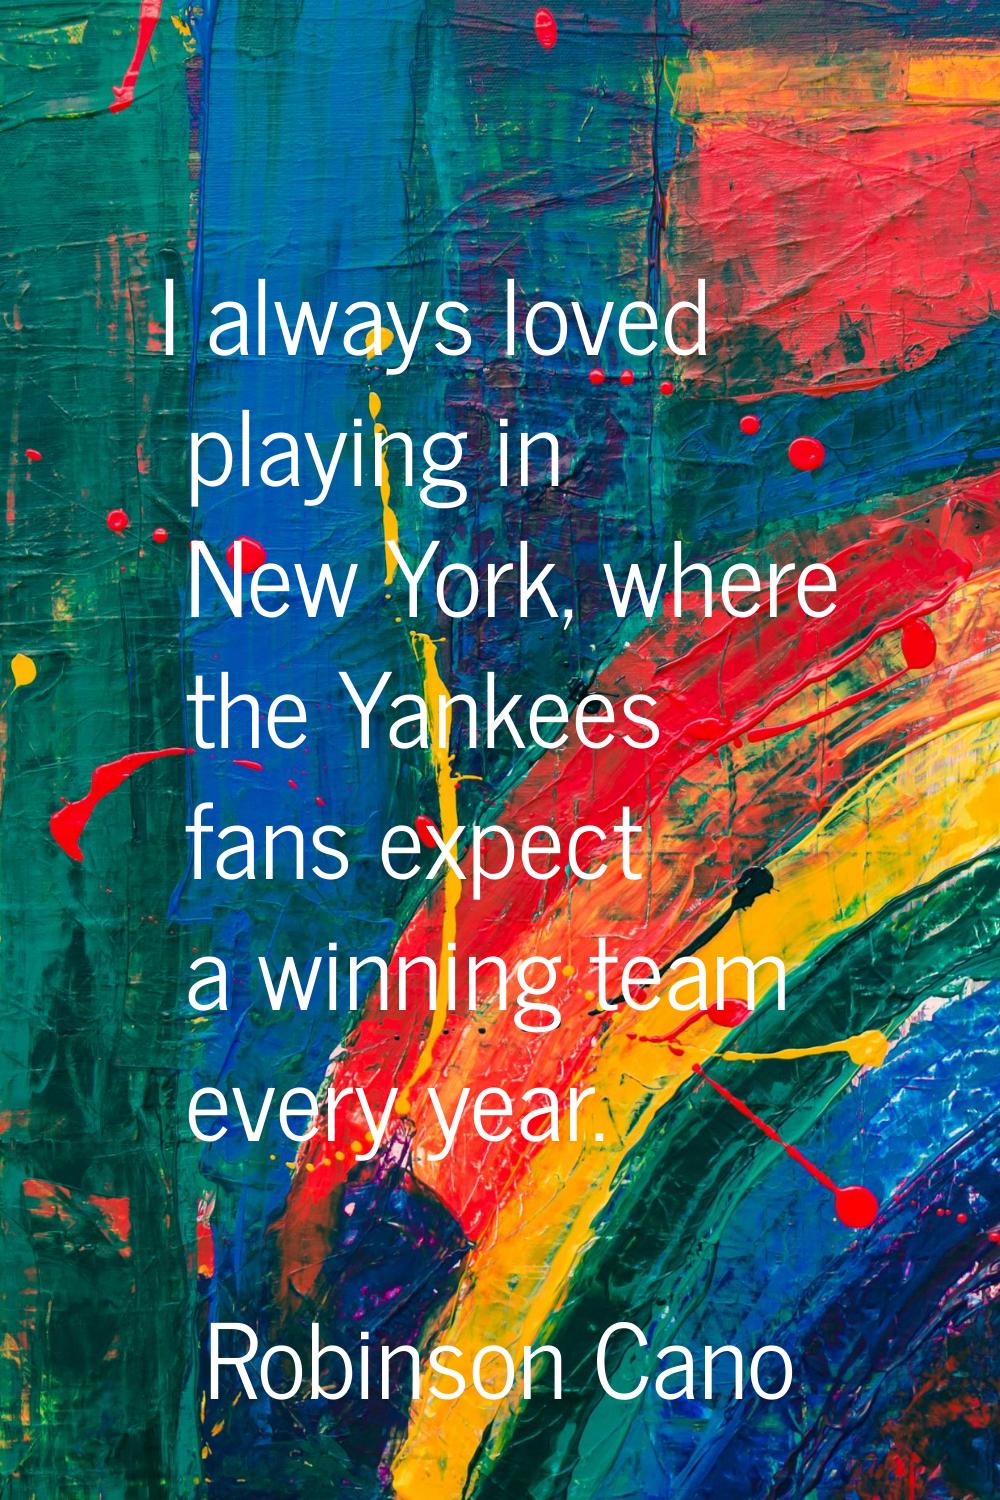 I always loved playing in New York, where the Yankees fans expect a winning team every year.